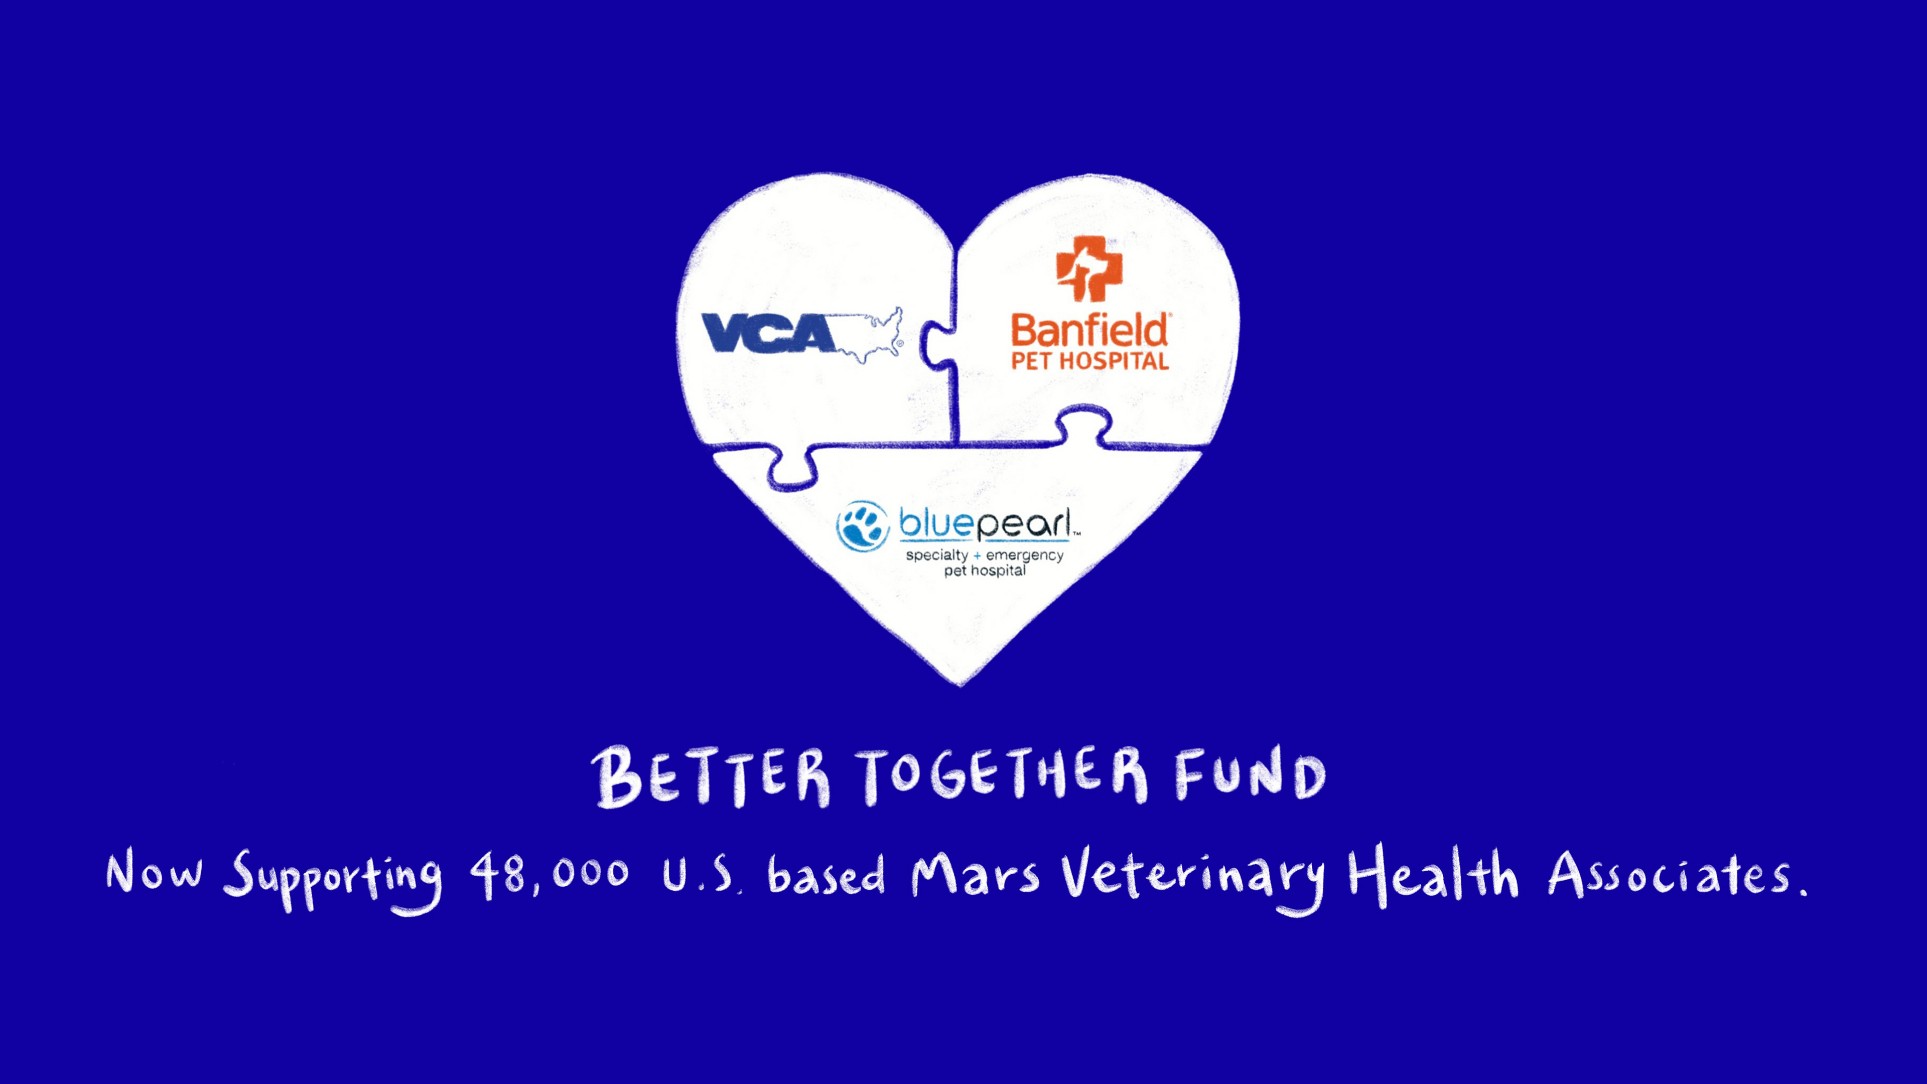 Contributors to the Better Together Fund